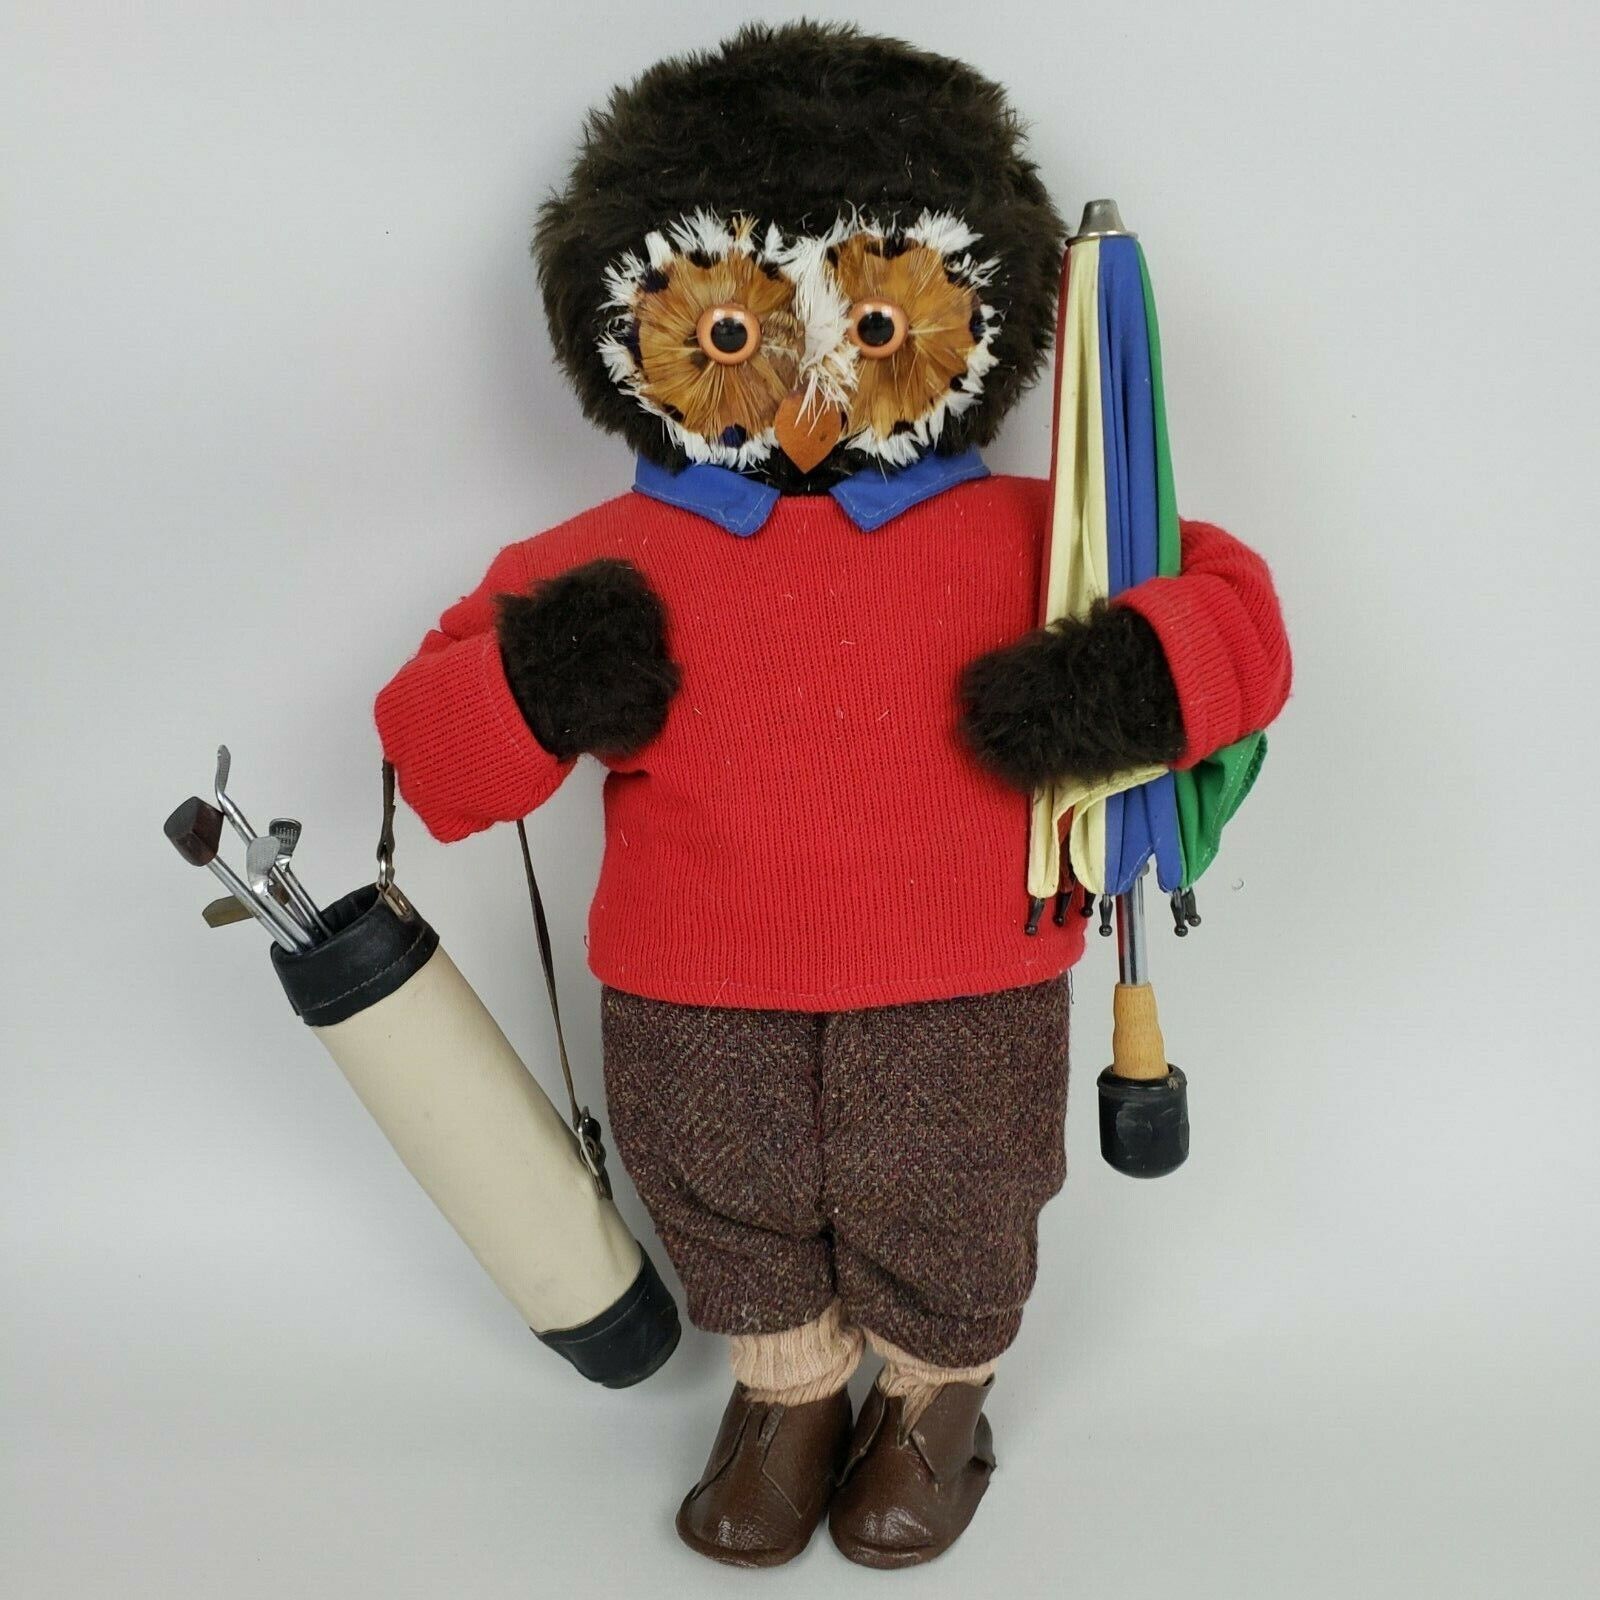 Abercrombie & Fitch Vintage London Owl Golfer Doll Umbrella Golf Clubs Feathered